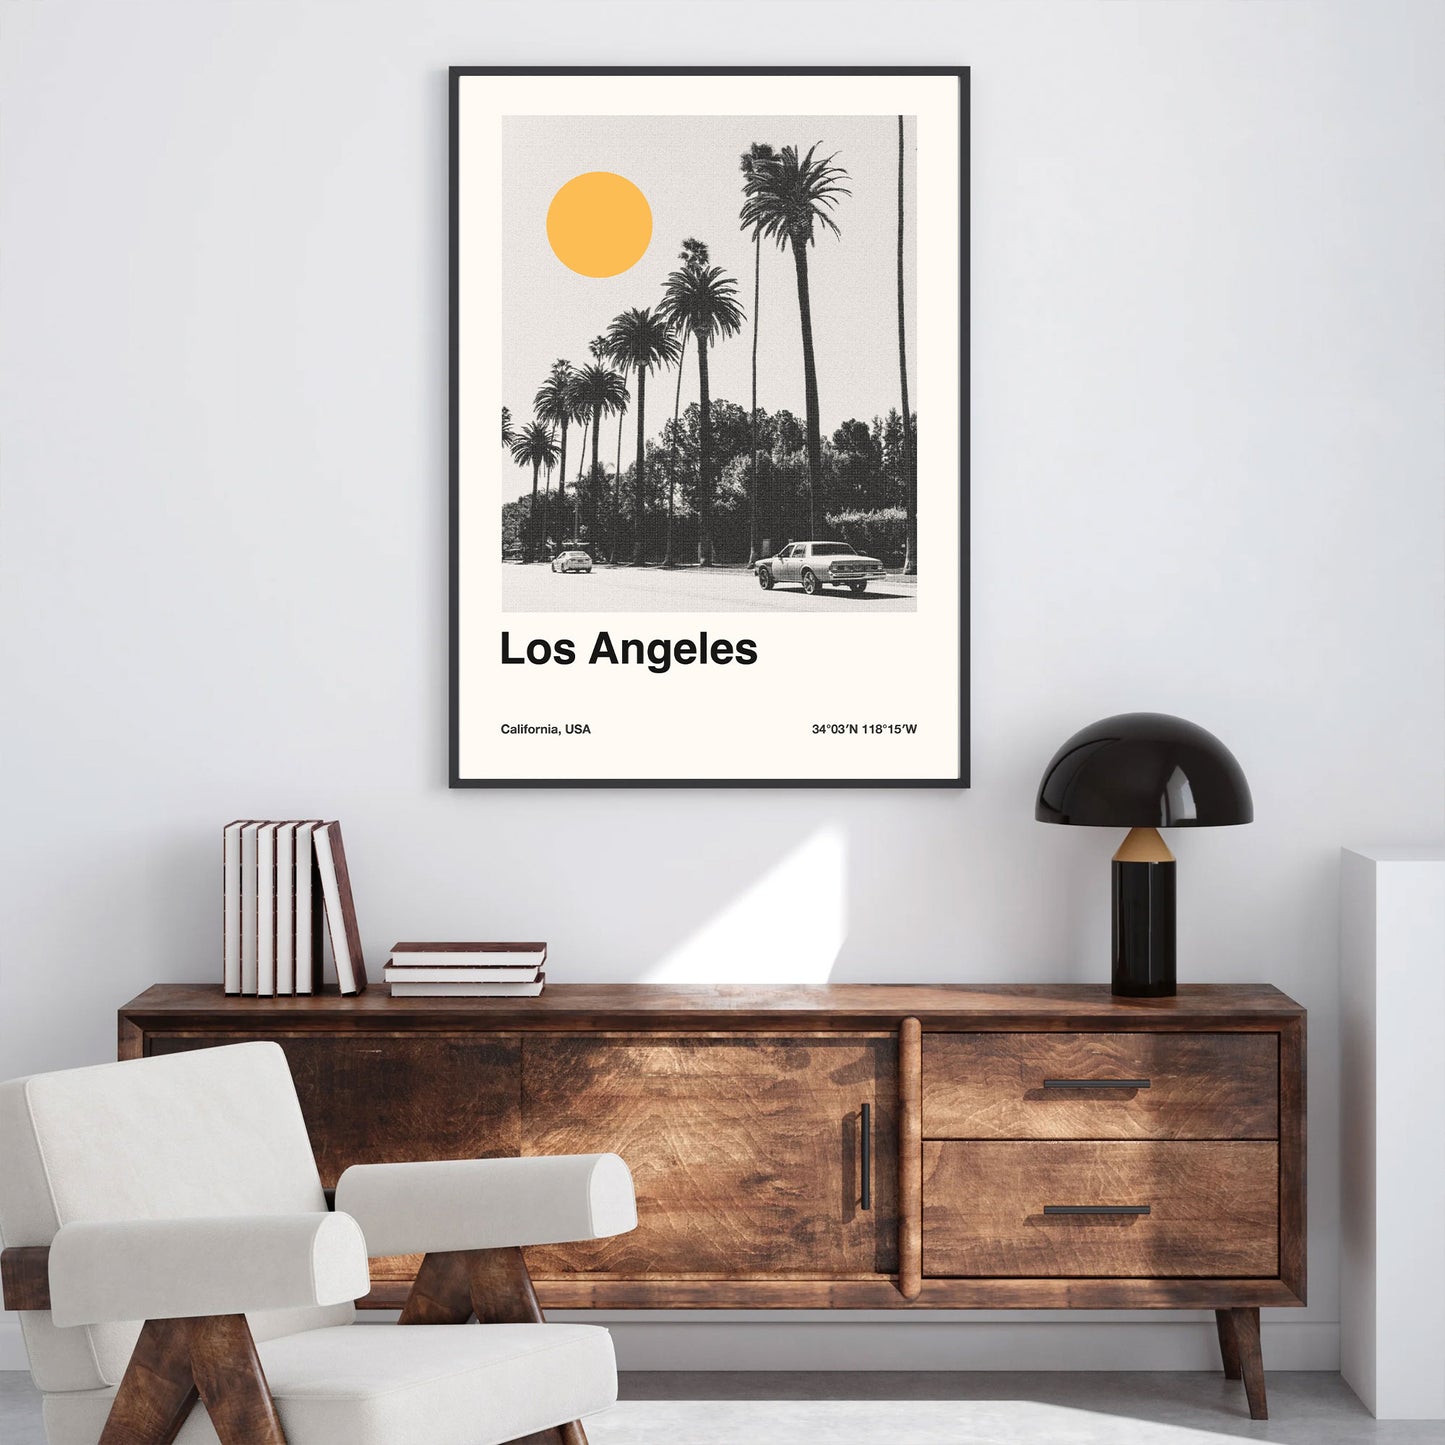 A print art of car, palm trees in los angeles california